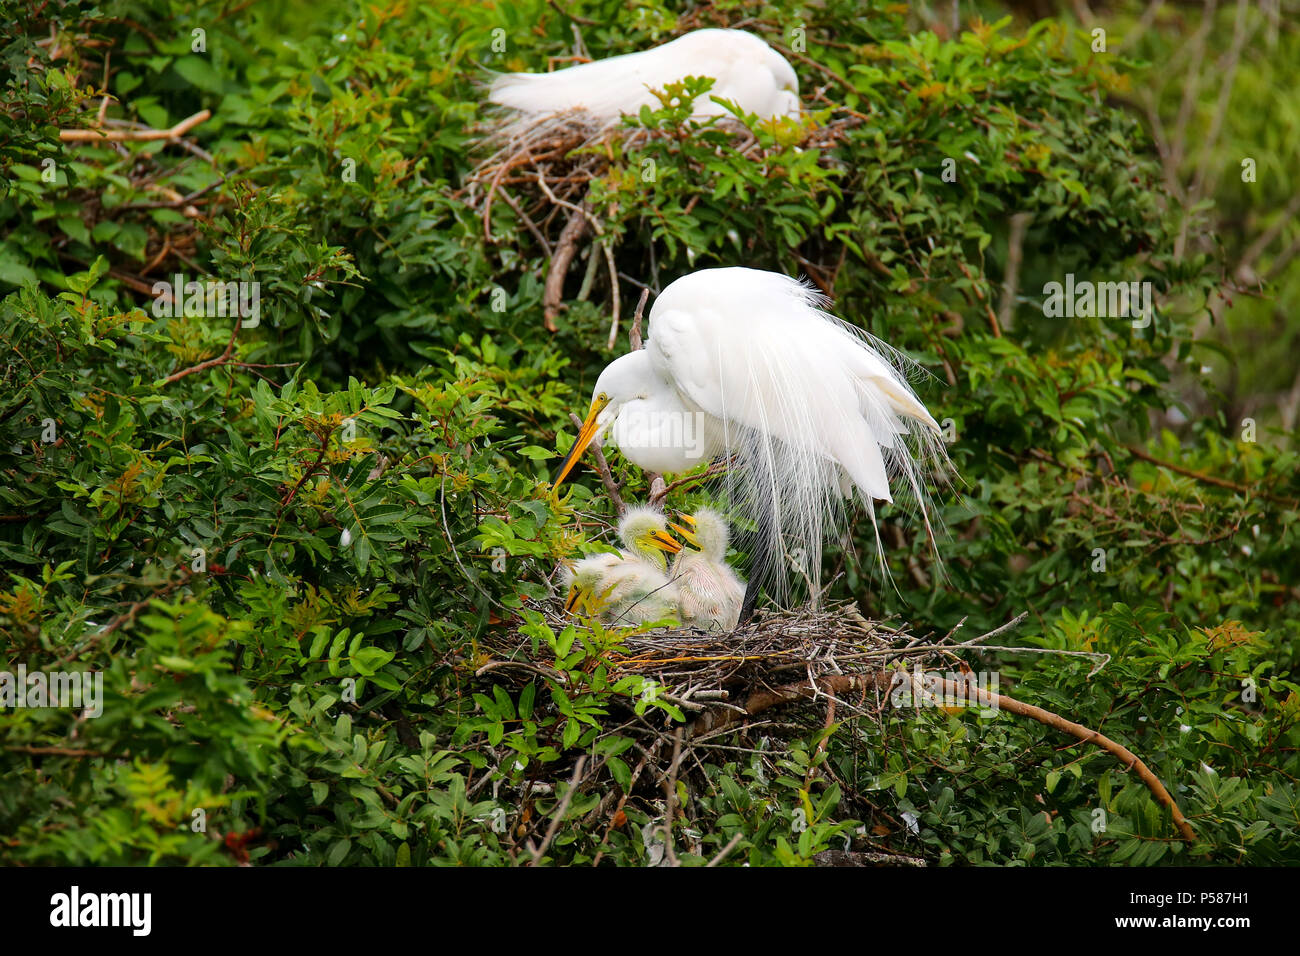 Great Egret (Ardea alba) in a nest with chicks Stock Photo